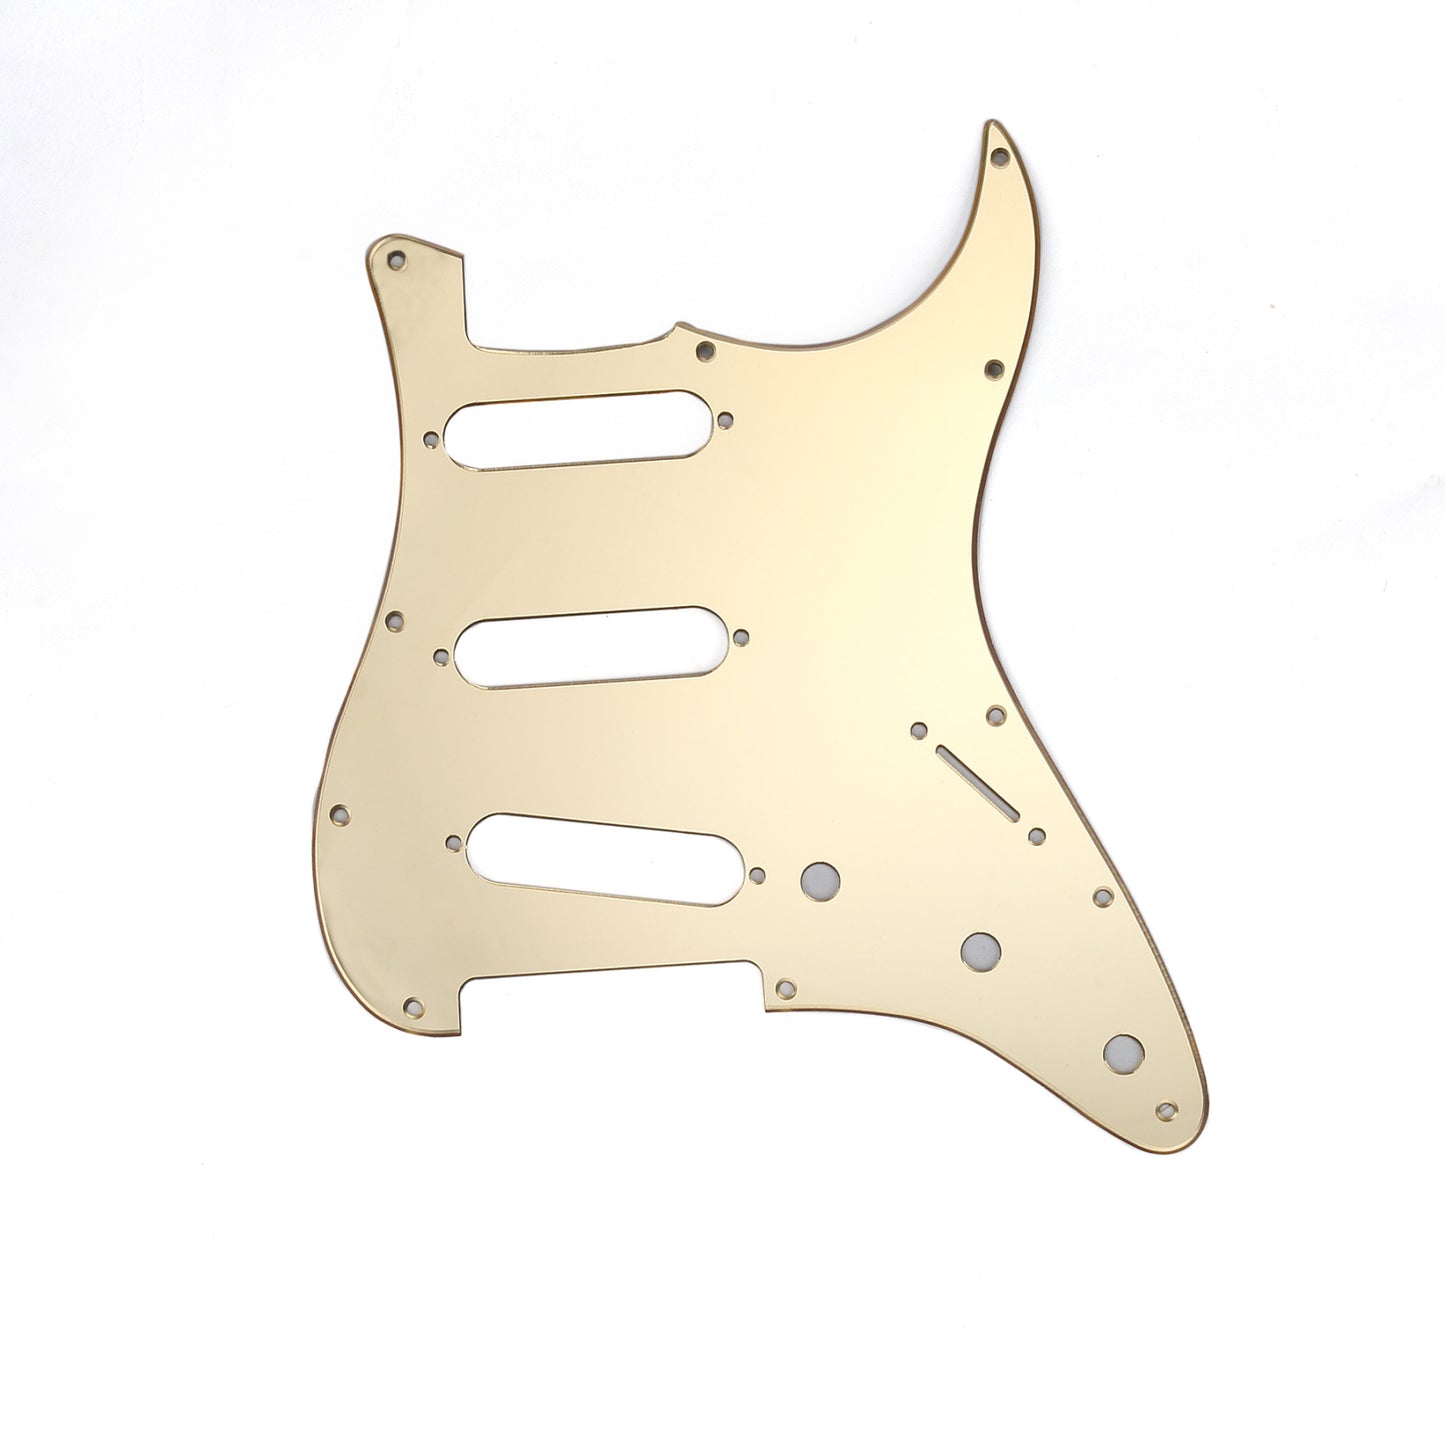 Musiclily SSS 11 Hole Strat Guitar Pickguard for Fender USA/Mexican Made Standard Stratocaster Modern Style, 1Ply Gold Mirror Acrylic